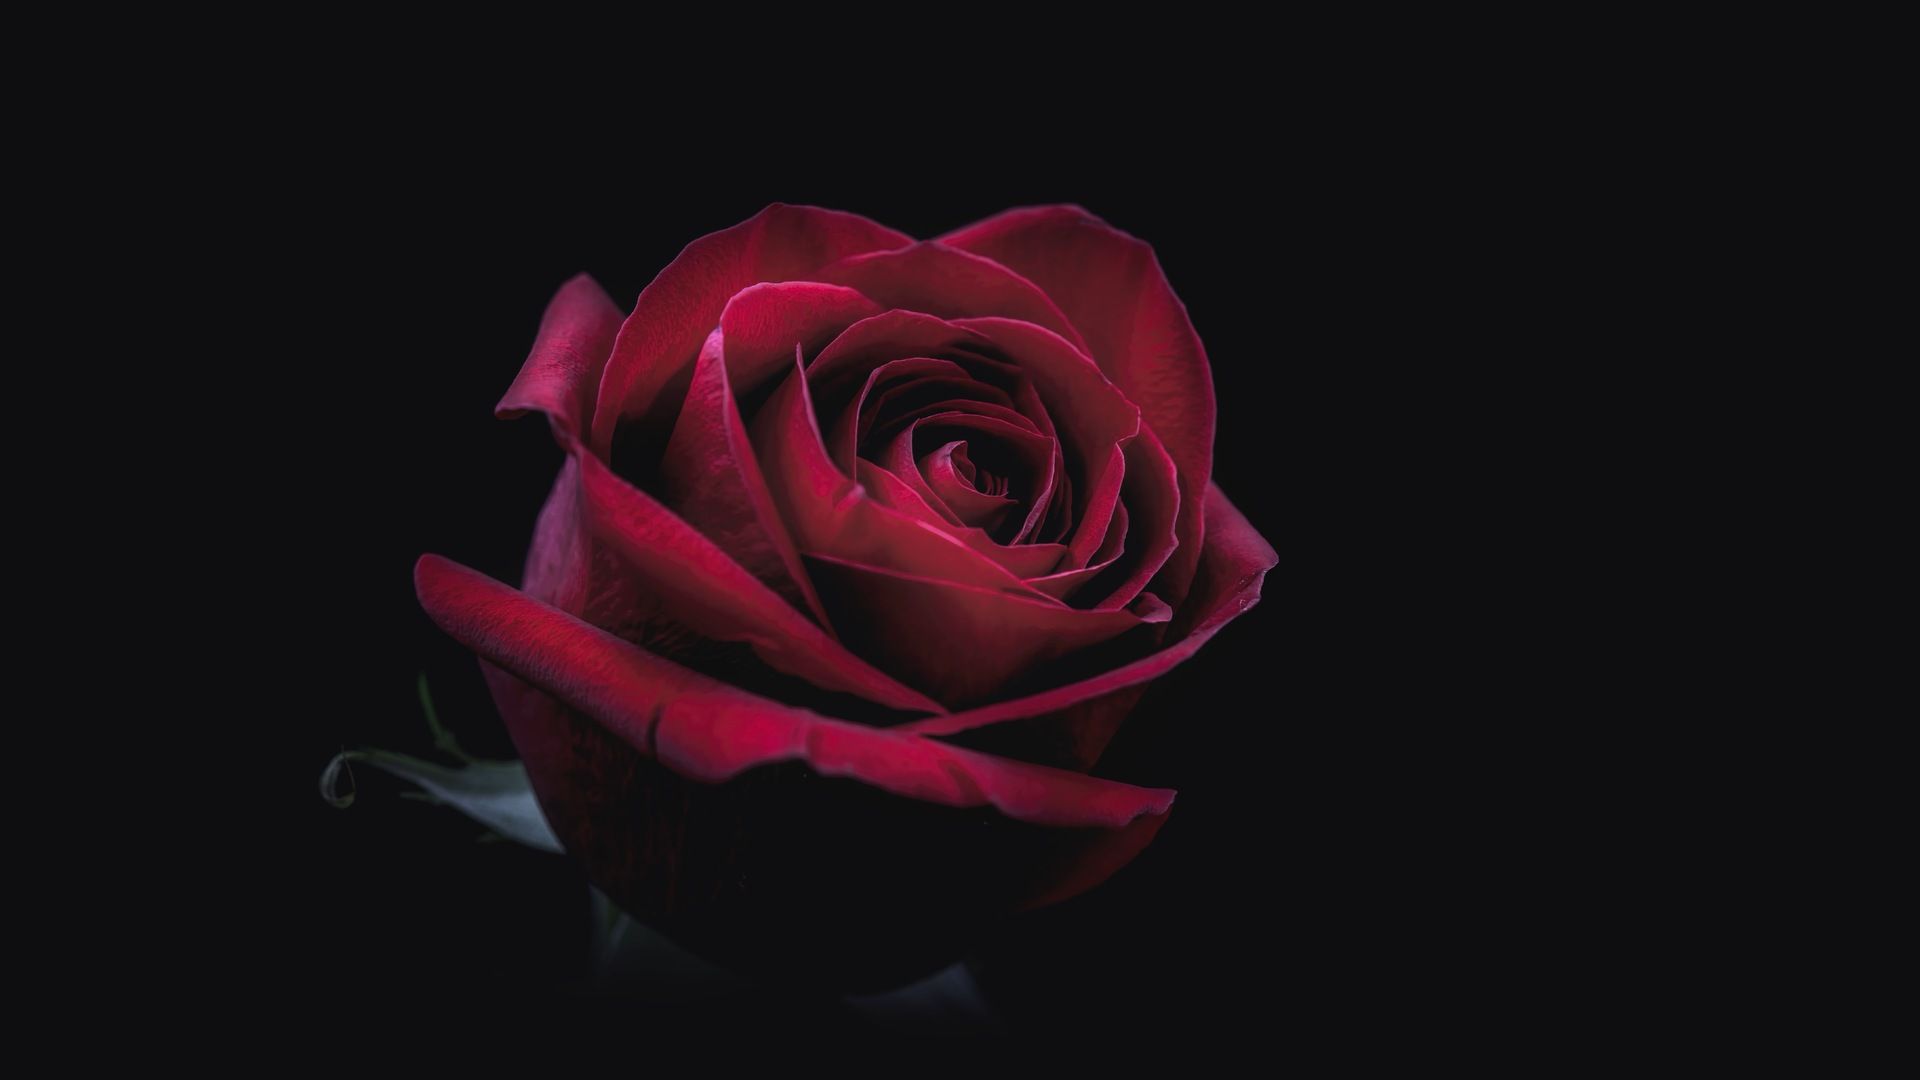 Rose Oled 8k Laptop Full HD 1080P HD 4k Wallpaper, Image, Background, Photo and Picture